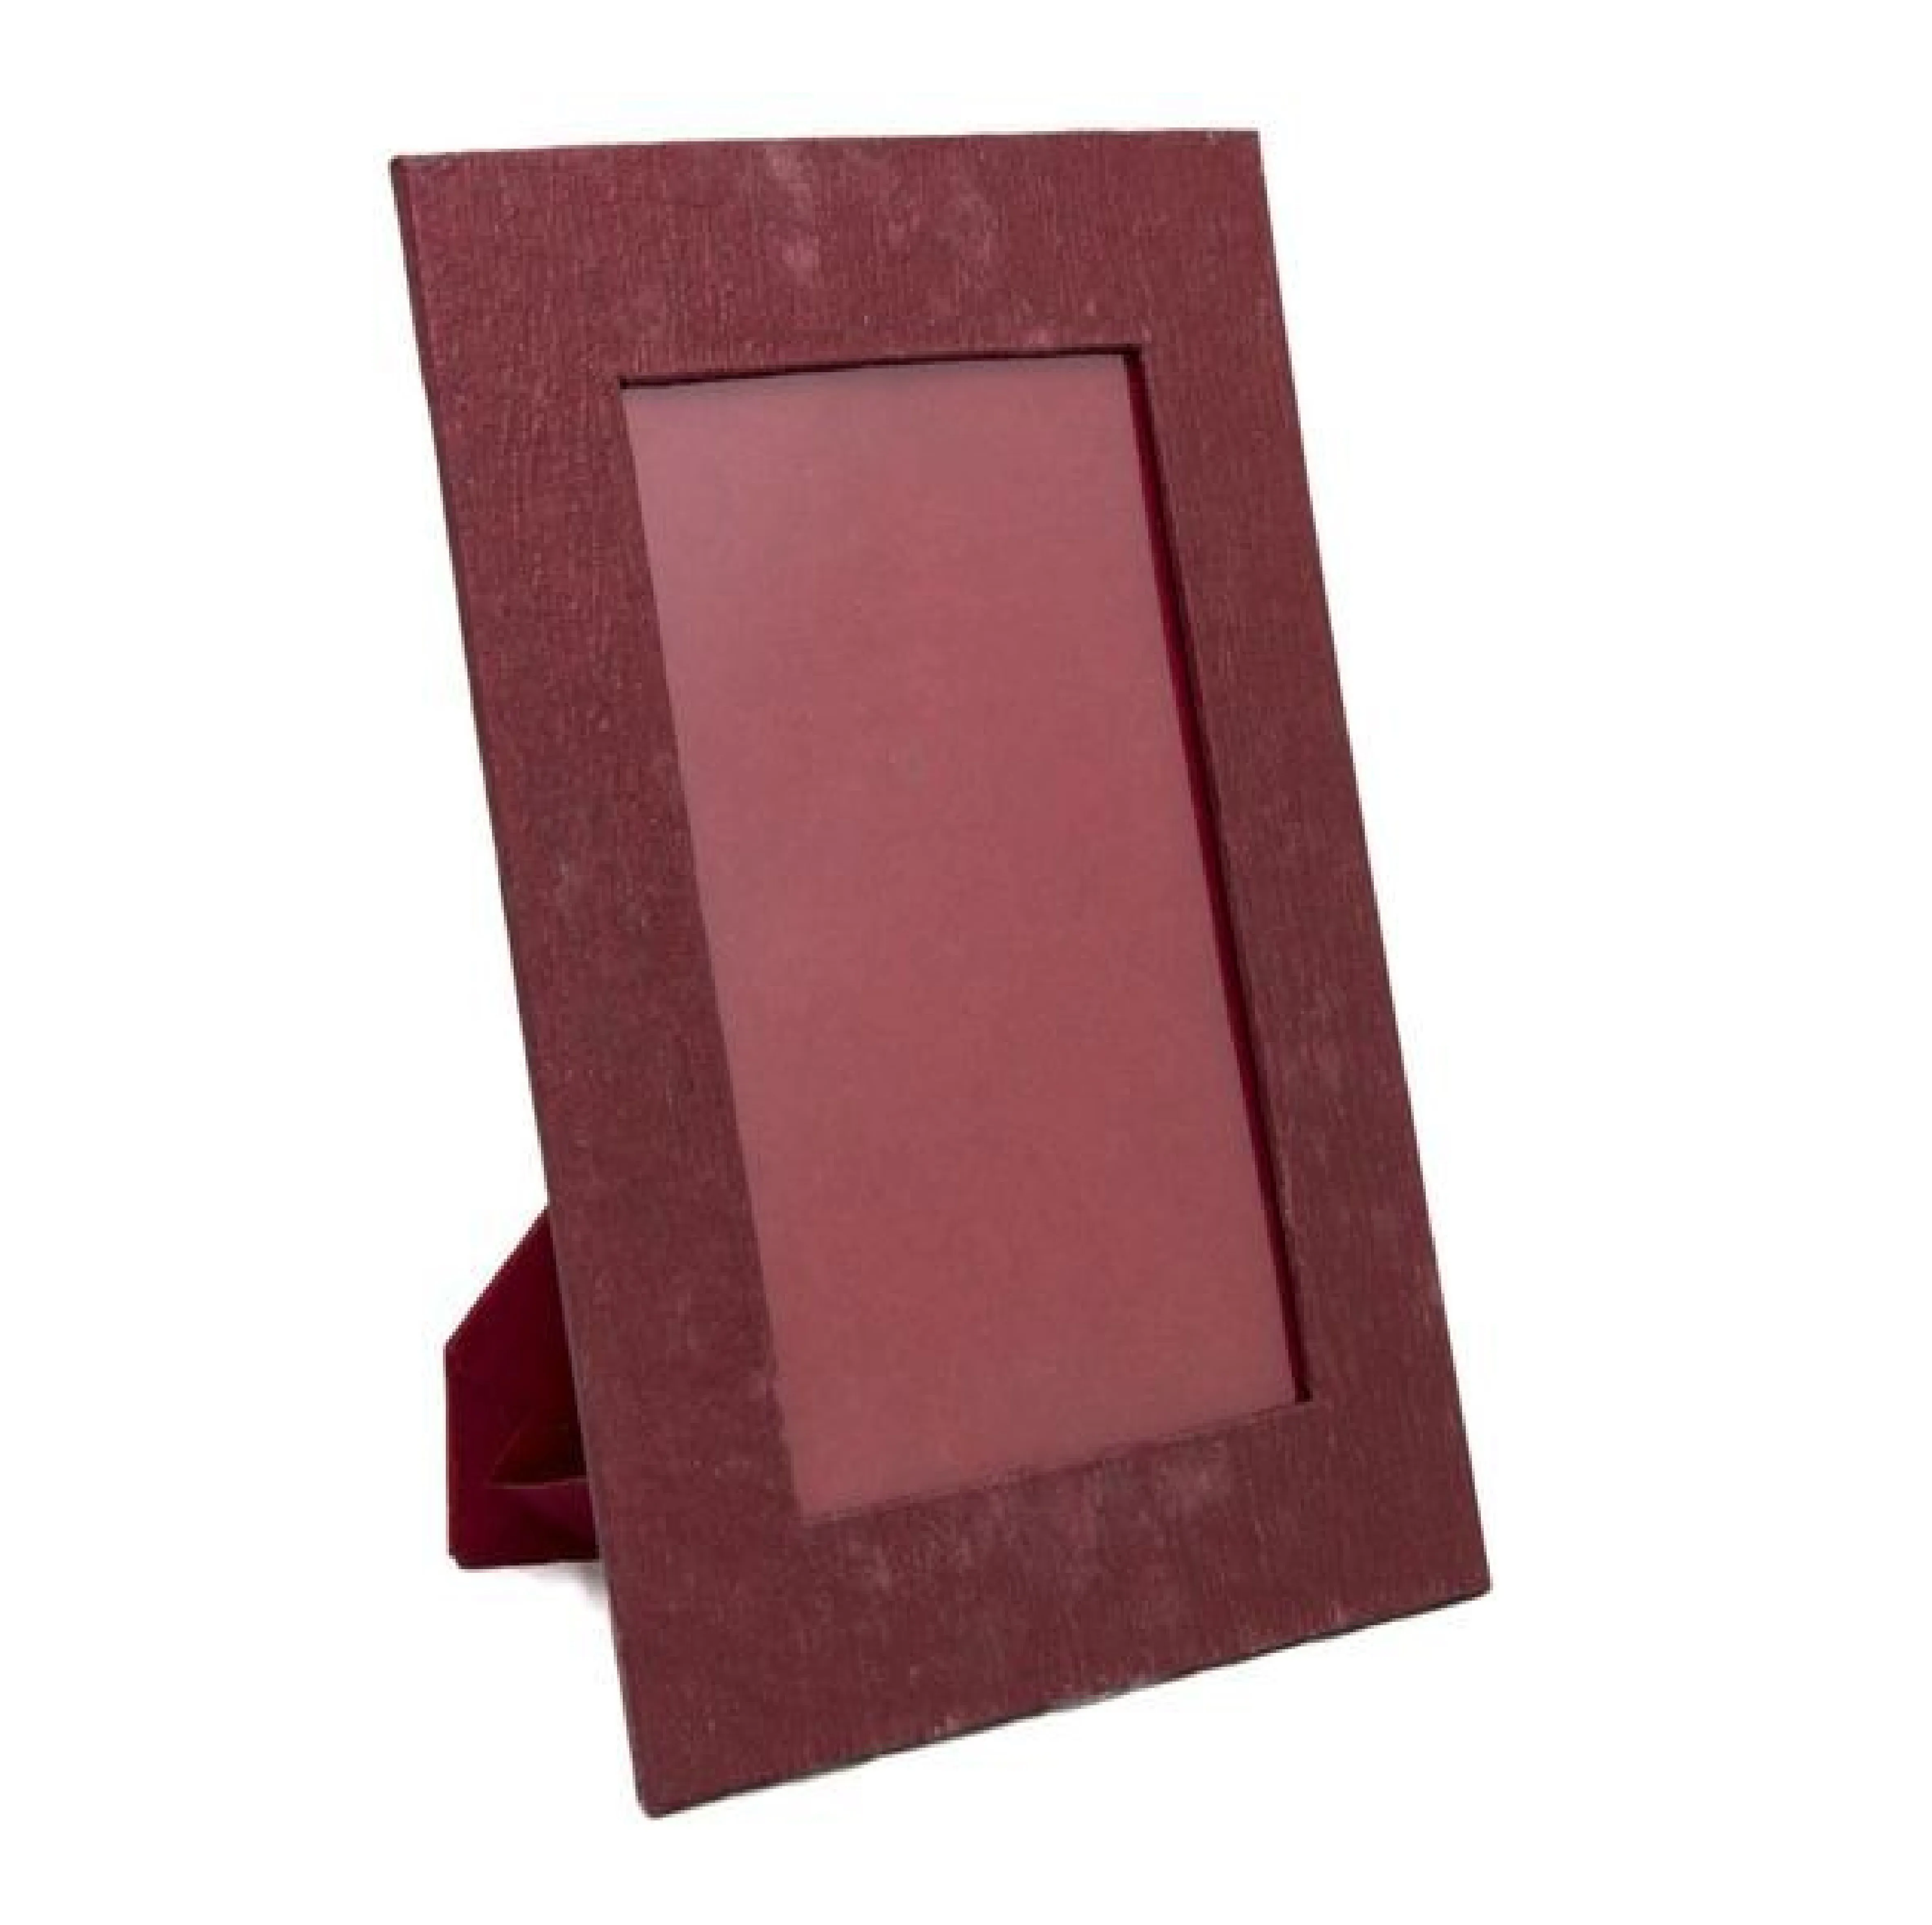 Paper Picture Frames - Paper Photo Frame Latest Price, Manufacturers &  Suppliers